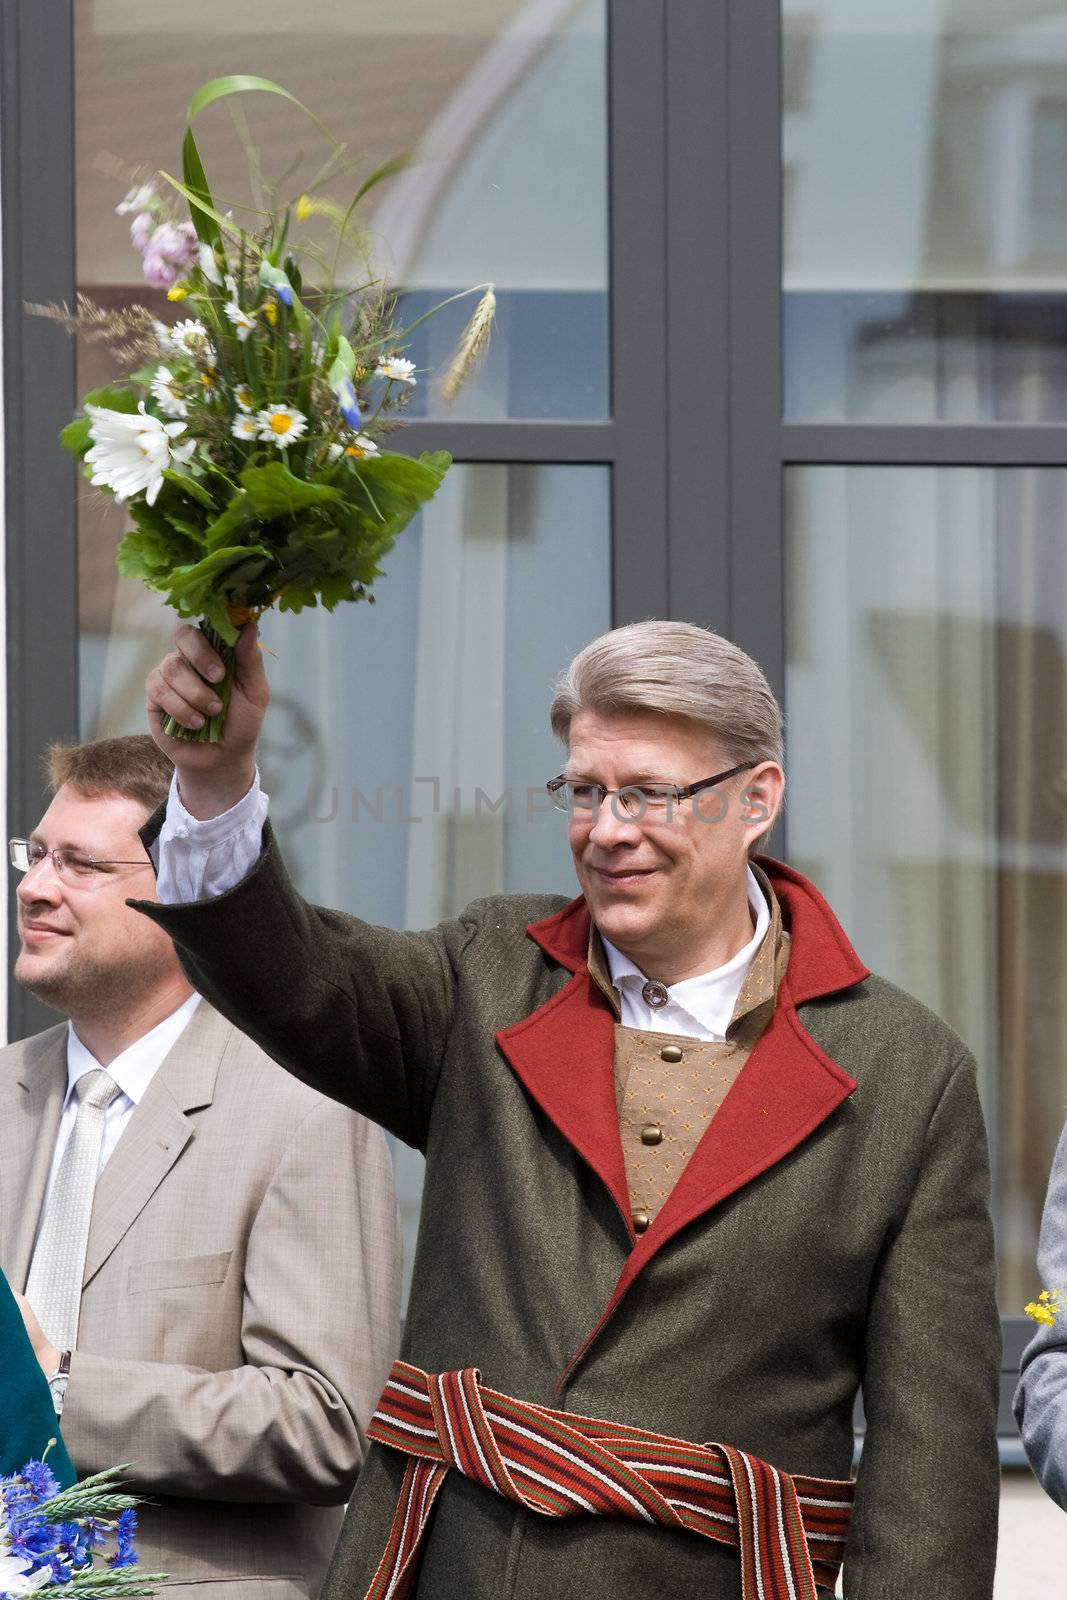 President of Latvia Valdis Zatlers wearing traditional costume greets the participants of the procession of the Song and Dance Celebration festival in Riga, Latvia